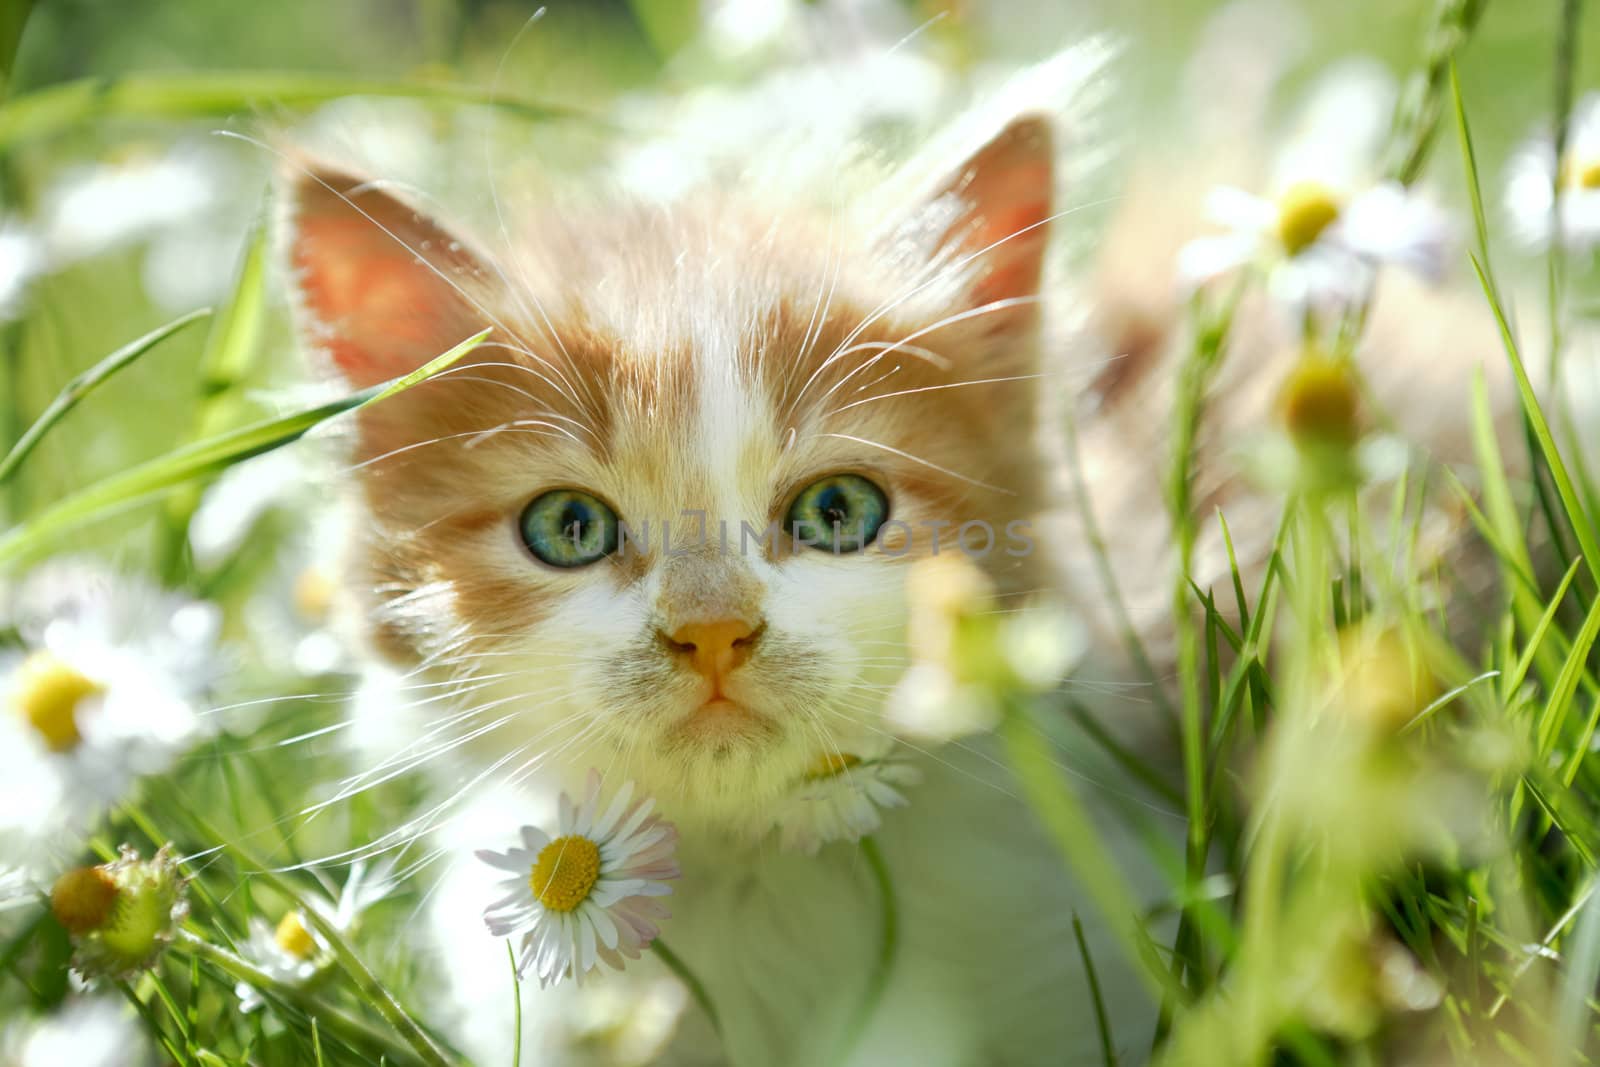 Cute little cat with beautiful eyes in green spring grass, back lit, looking at the camera